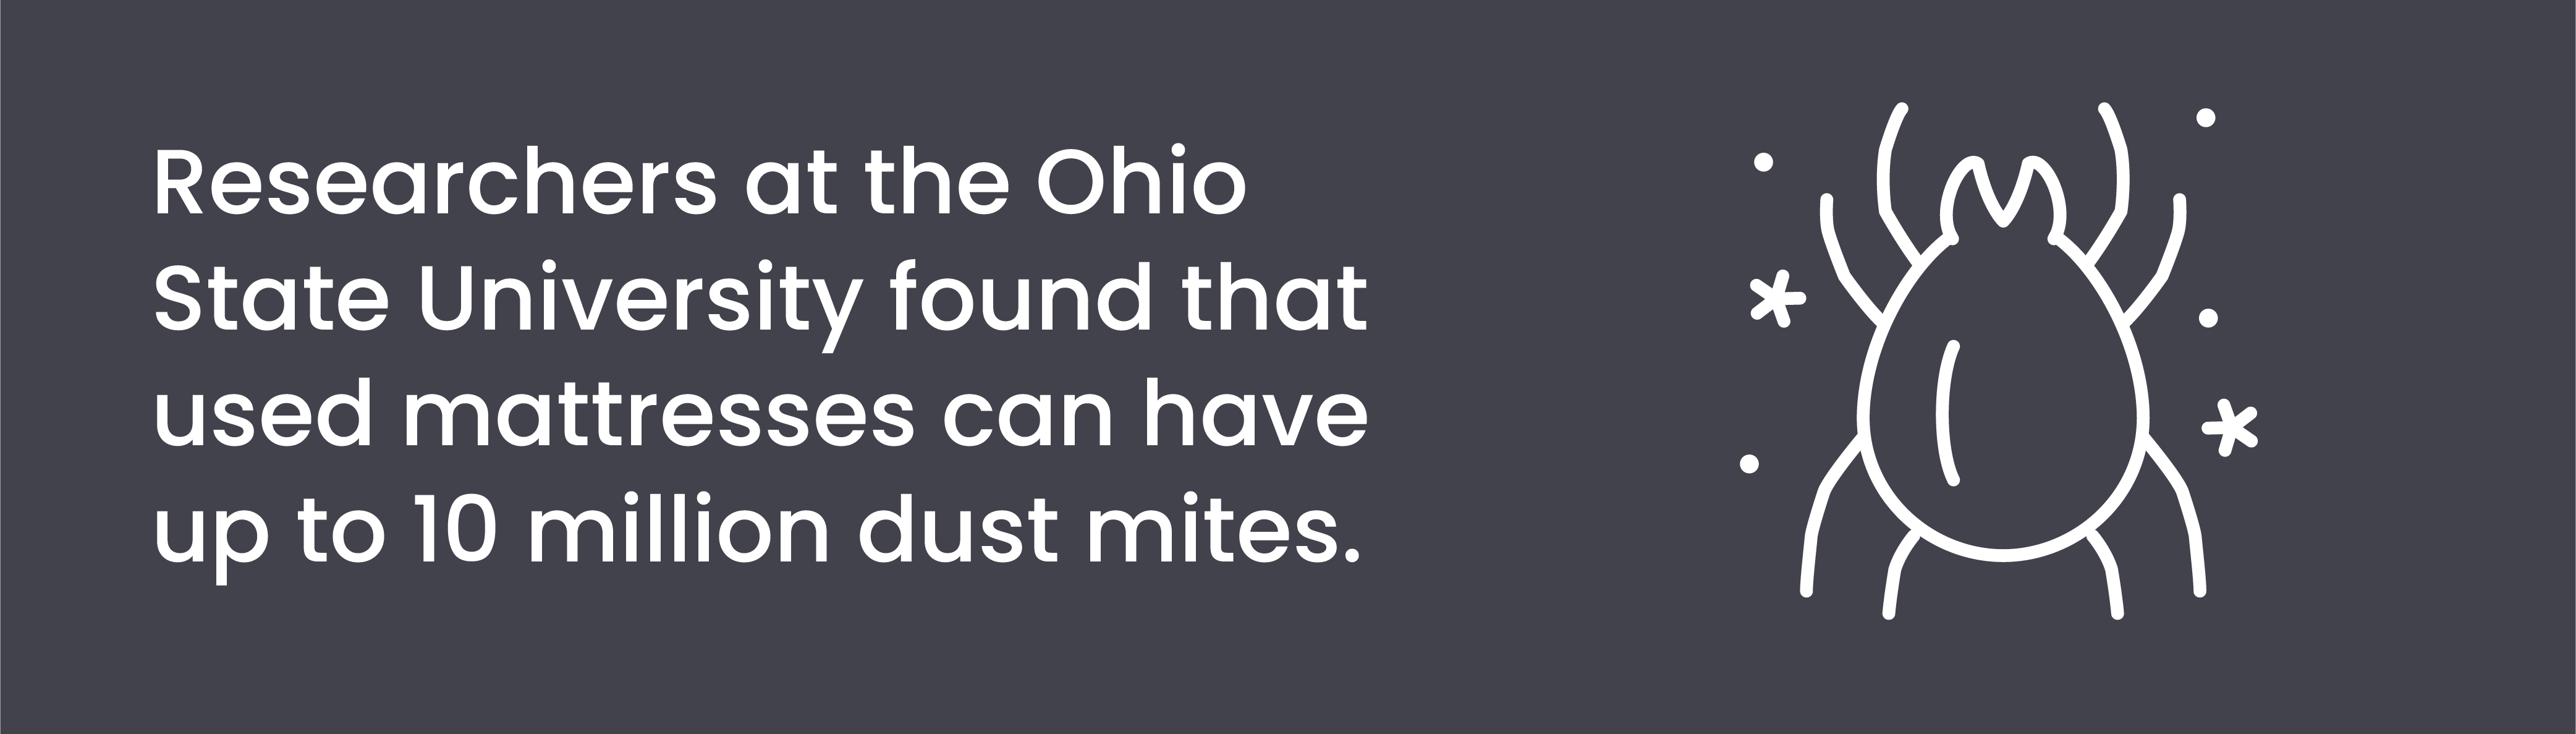 Researchers at the Ohio State University found that used mattresses can have up to 10 million dust mites.